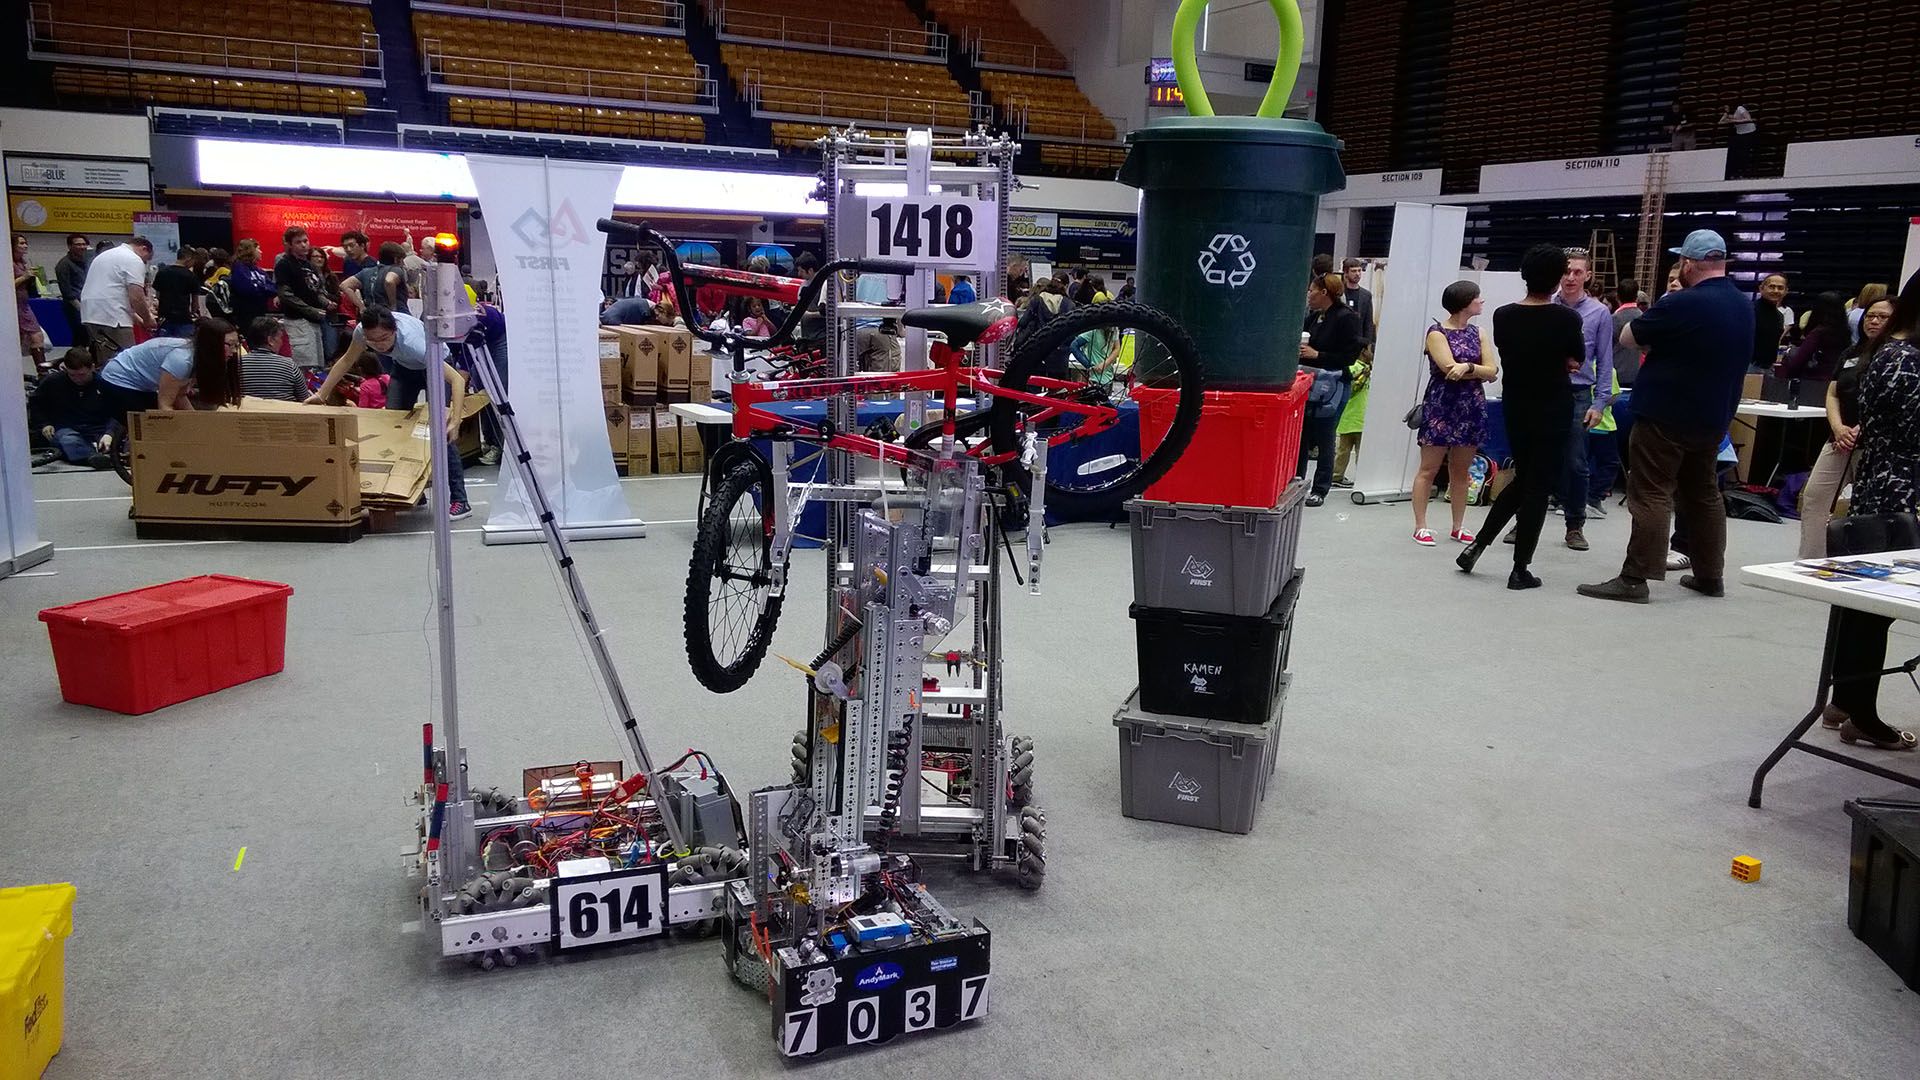 The 2015 robot holding up a red bike.